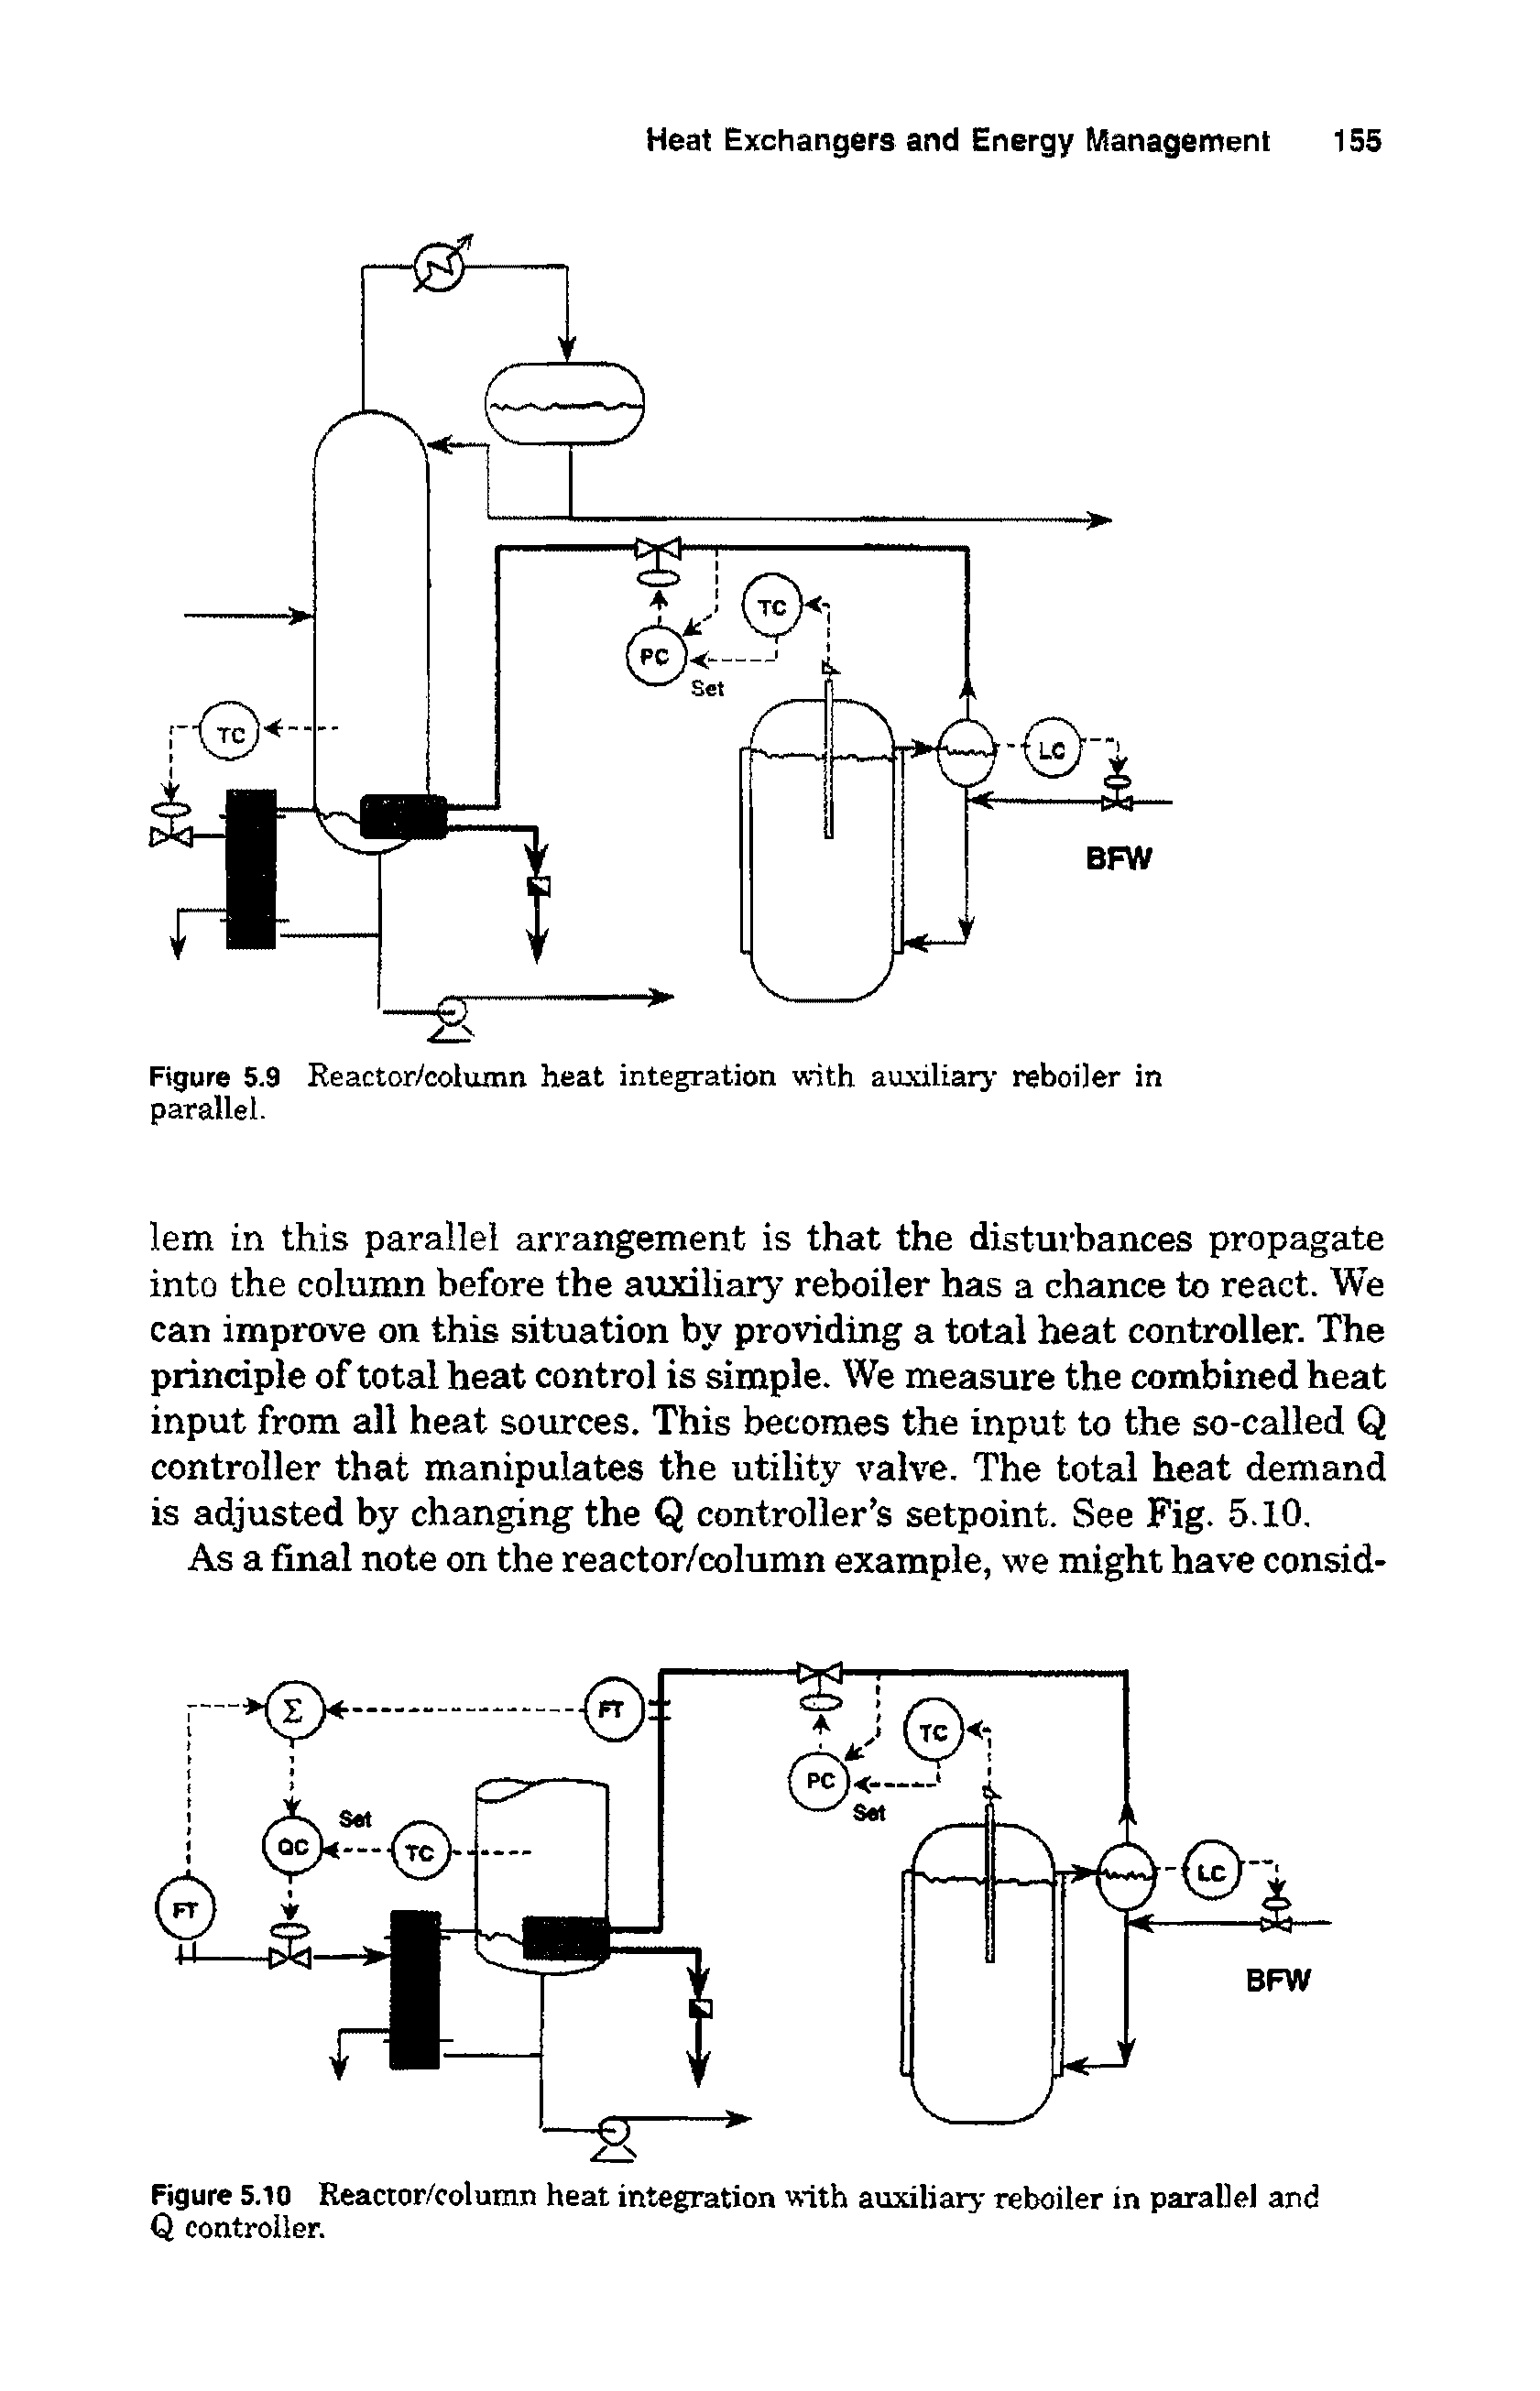 Figure 5.9 Reactor/column heat integration with auxiliary reboiler in parallel.